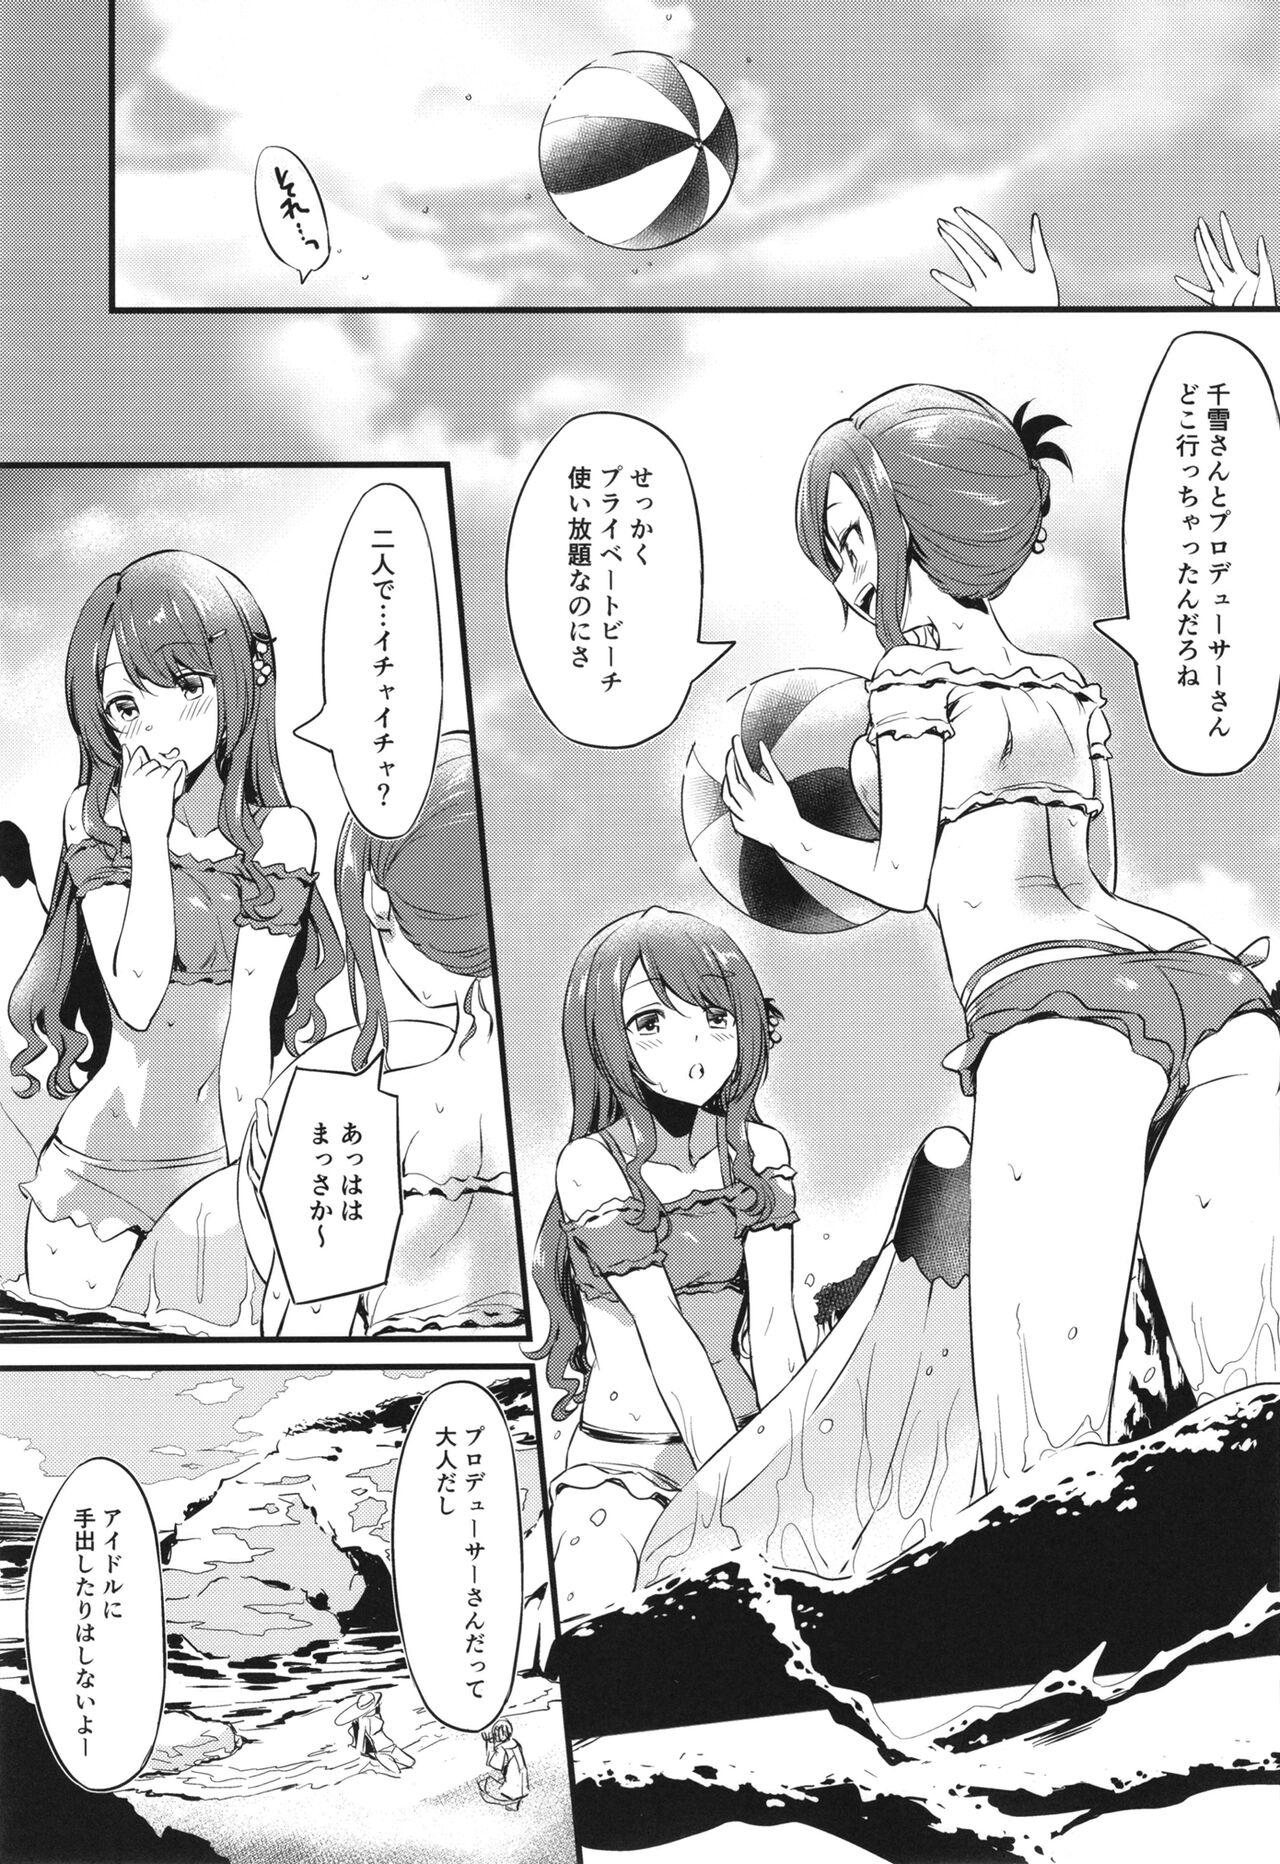 Special Locations 千雪さんのエッチな撮影会 - The idolmaster Parties - Page 3